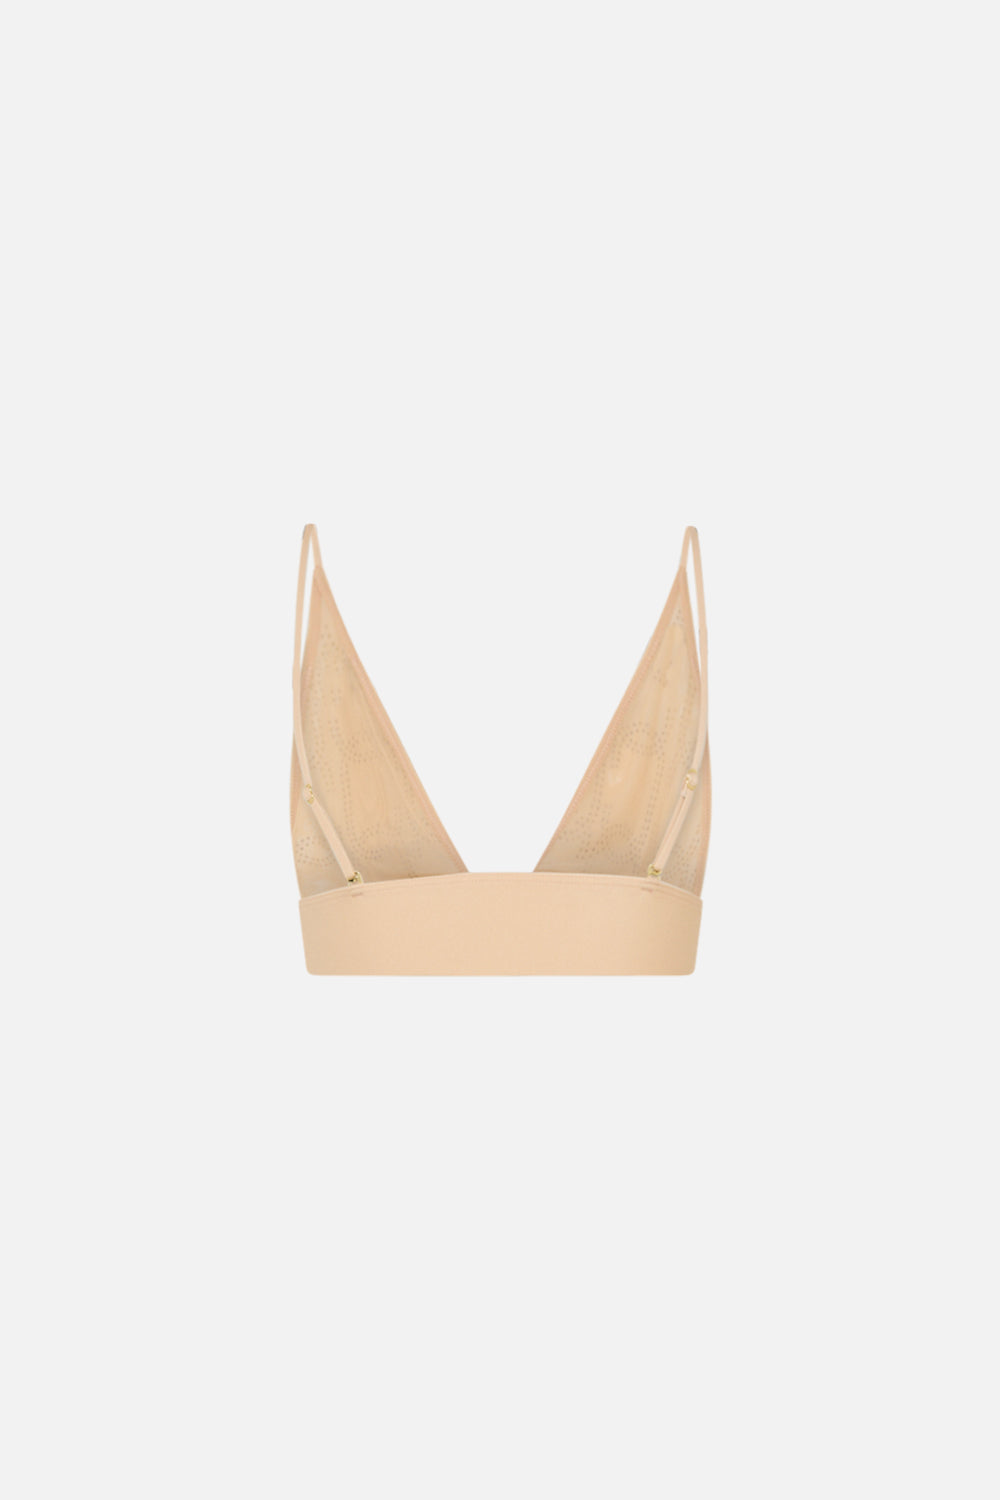 MESH SOFT PULL ON TRI BRA SOLID NUDE